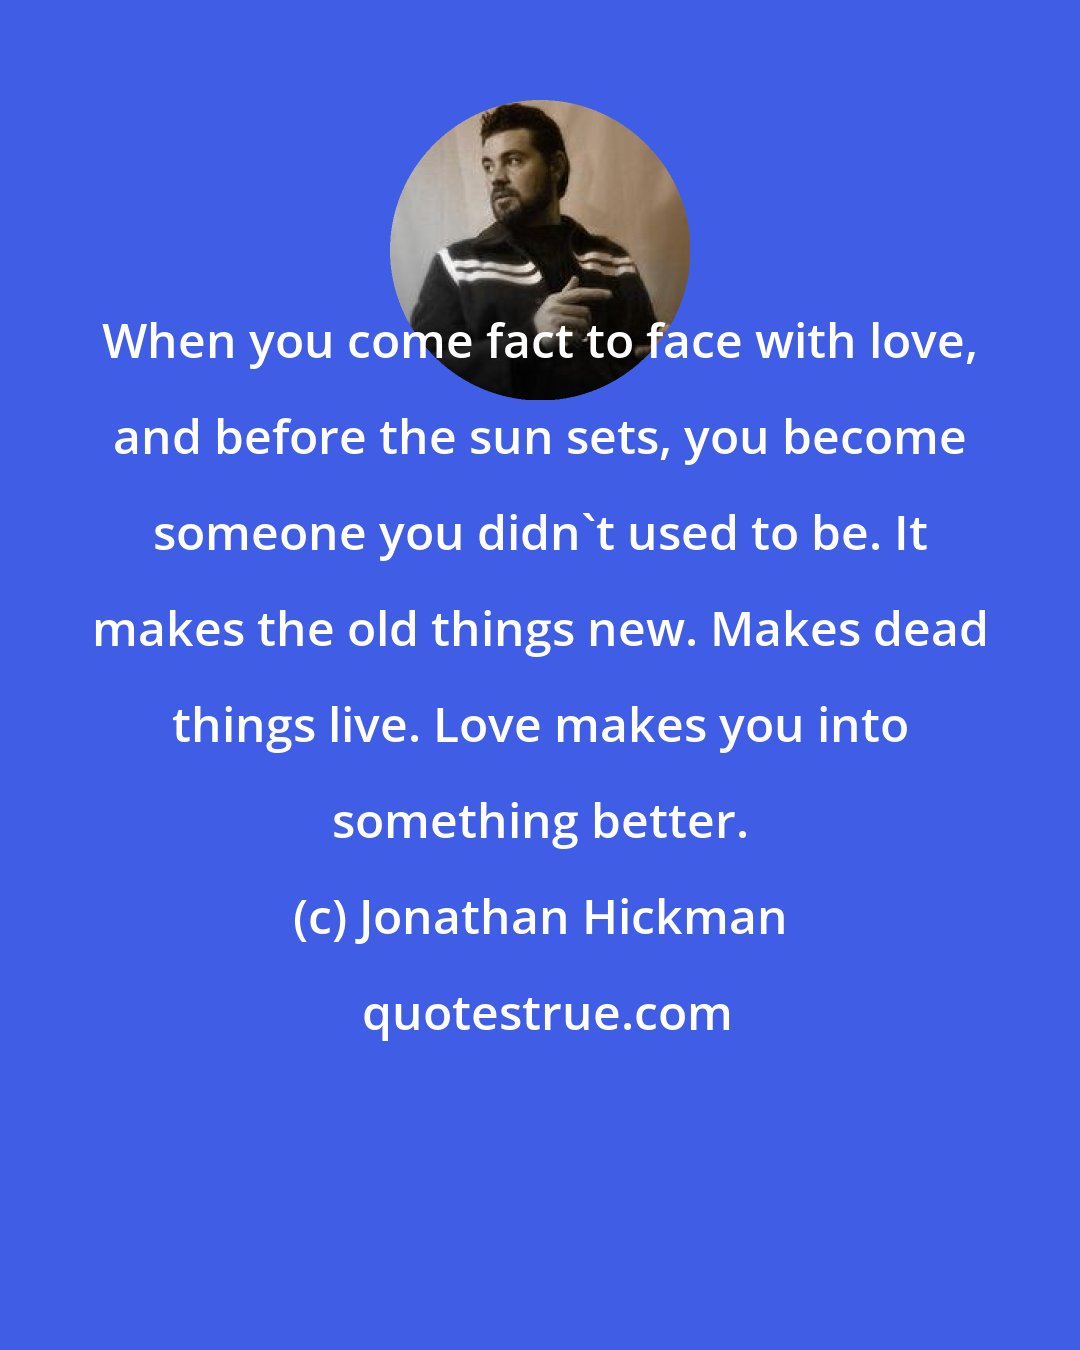 Jonathan Hickman: When you come fact to face with love, and before the sun sets, you become someone you didn't used to be. It makes the old things new. Makes dead things live. Love makes you into something better.